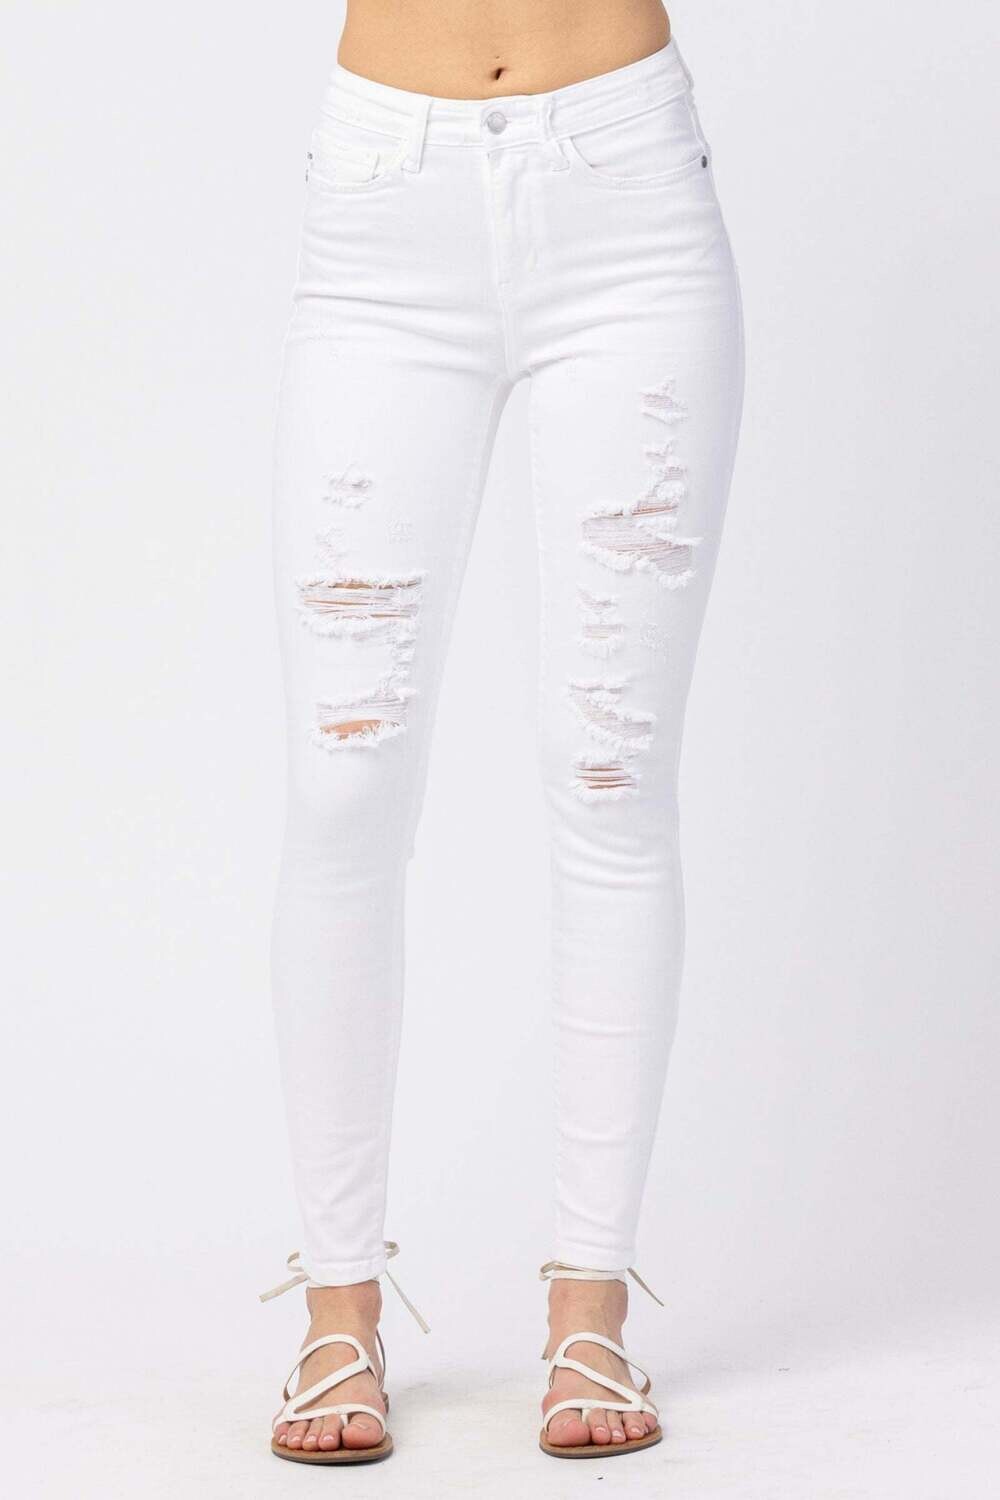 Judy Blue Mid-Rise Skinny White Destroyed